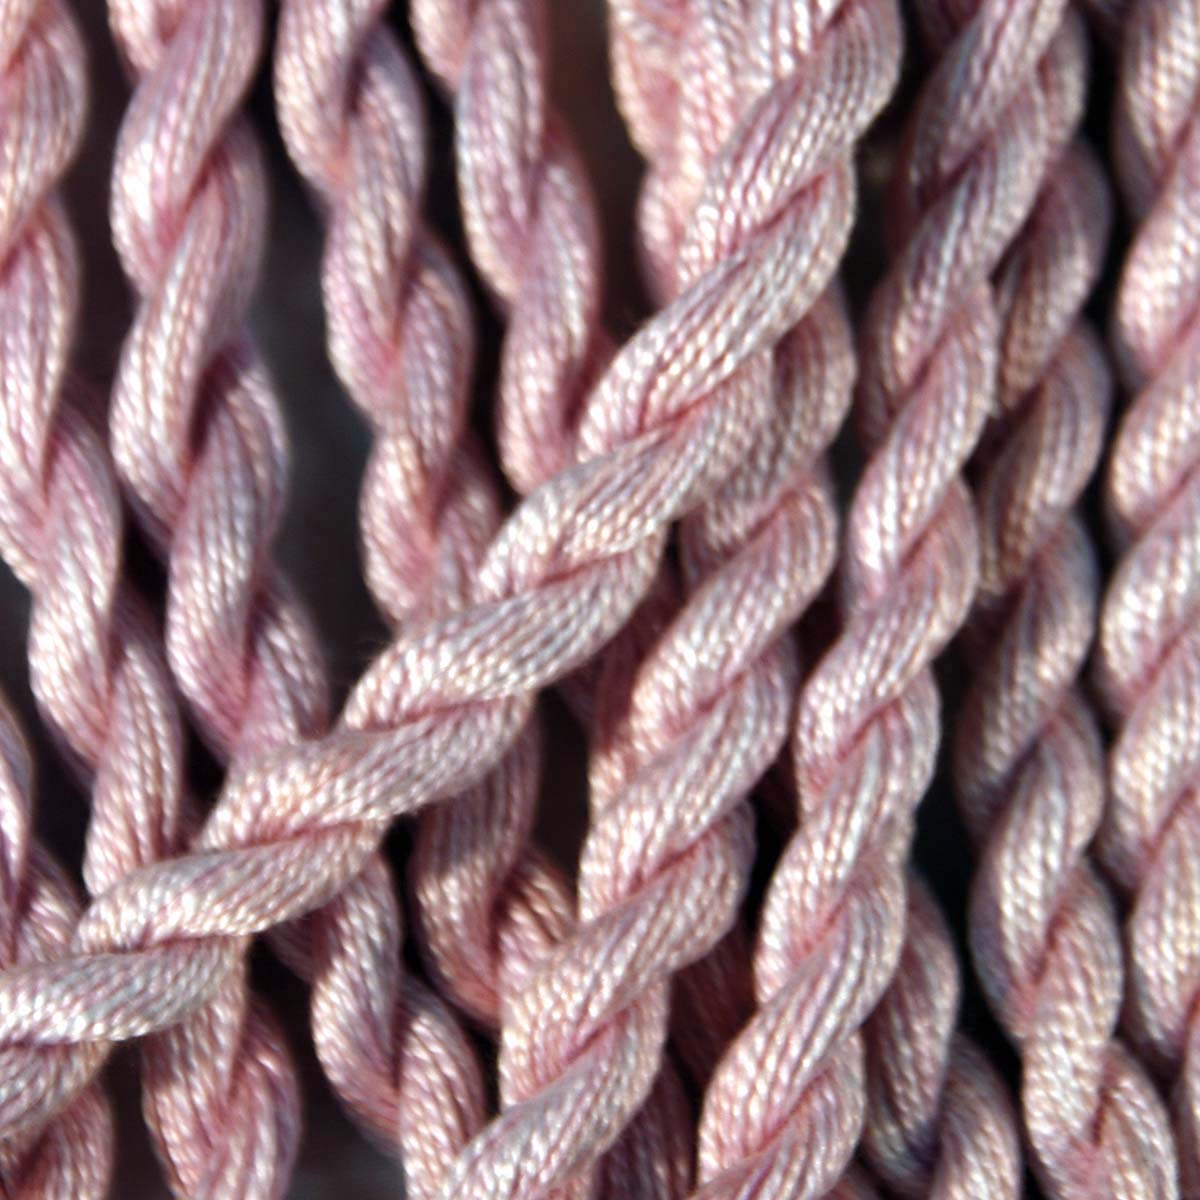 www.colourstreams.com.au Colour Streams Hand Dyed Cotton Threads Cotto Strands Slow Stitch Embroidery Textile Arts Fibre DL 3 Musk Rose Purples Pinks